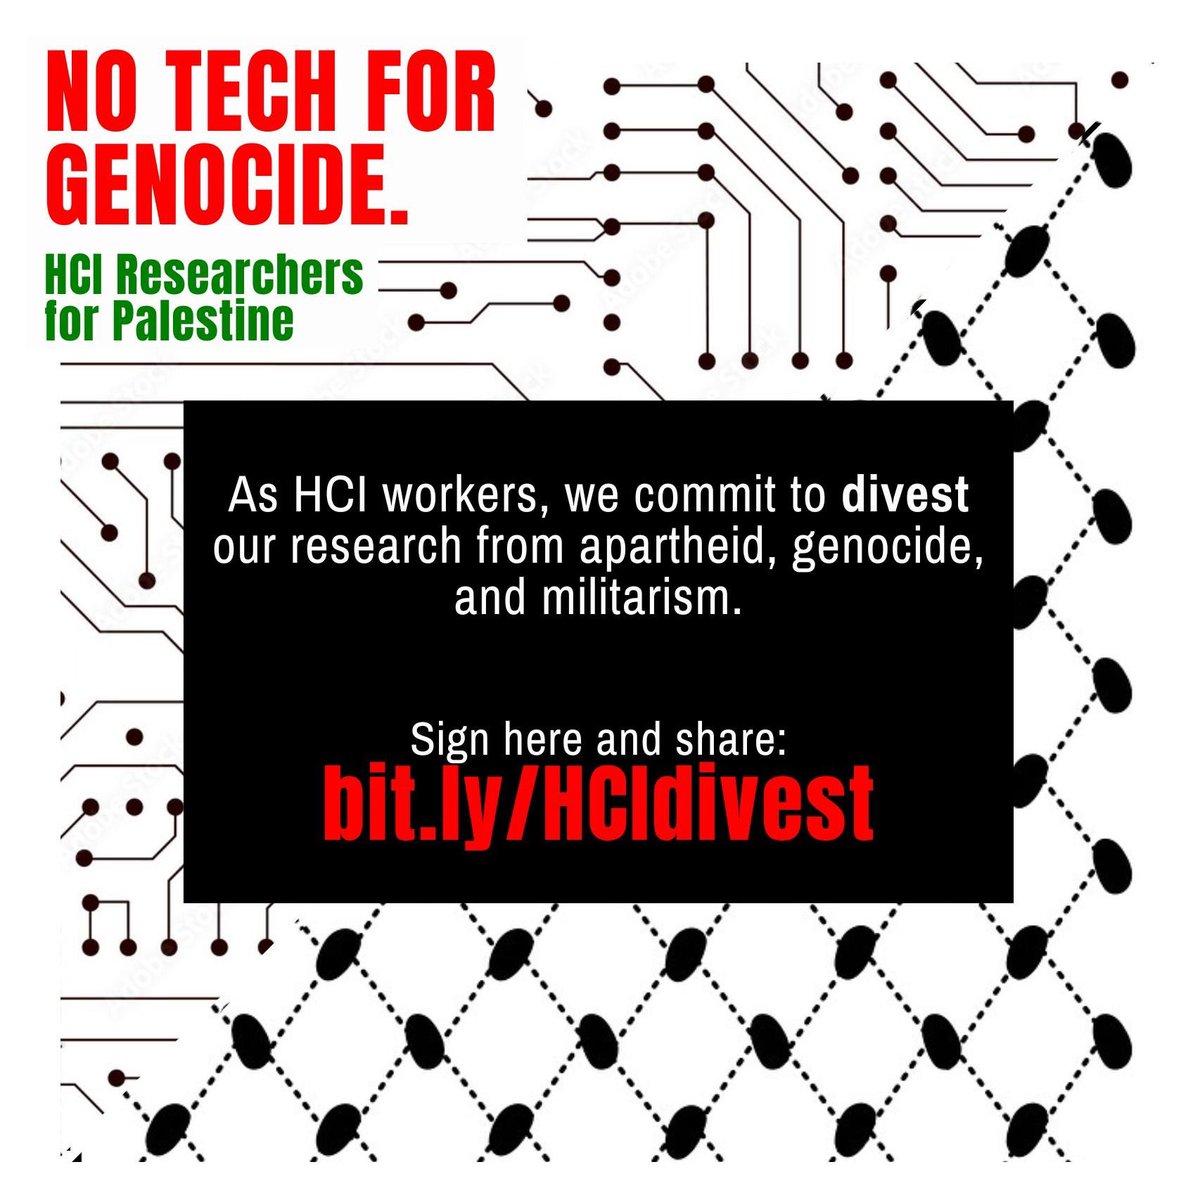 As #CHI2024 occurs in Hawai’i, the genocide of Palestinians continues. In last week's HCI for Palestine workshop, we discussed how HCI workers can organize to #divest our labor from militarism and occupation. Join us & sign the pledge here: bit.ly/HCIdivest